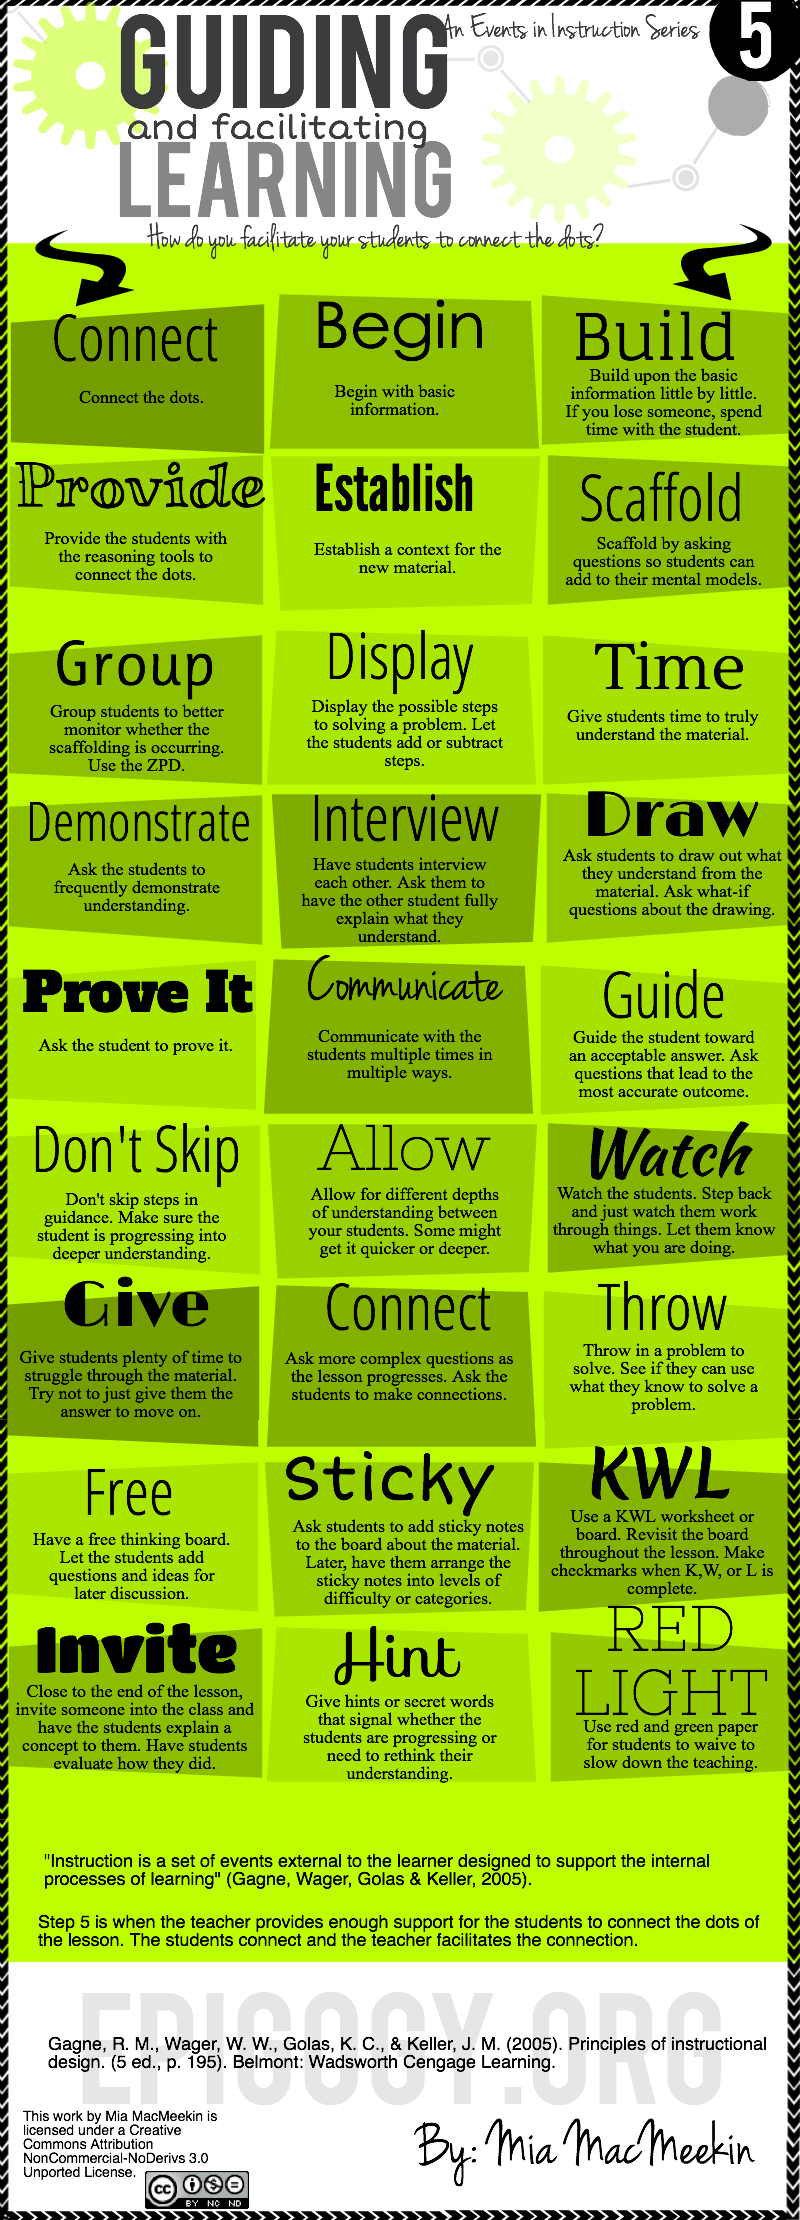 27 Ways Teachers Can Guide and Facilitate Learning Infographic